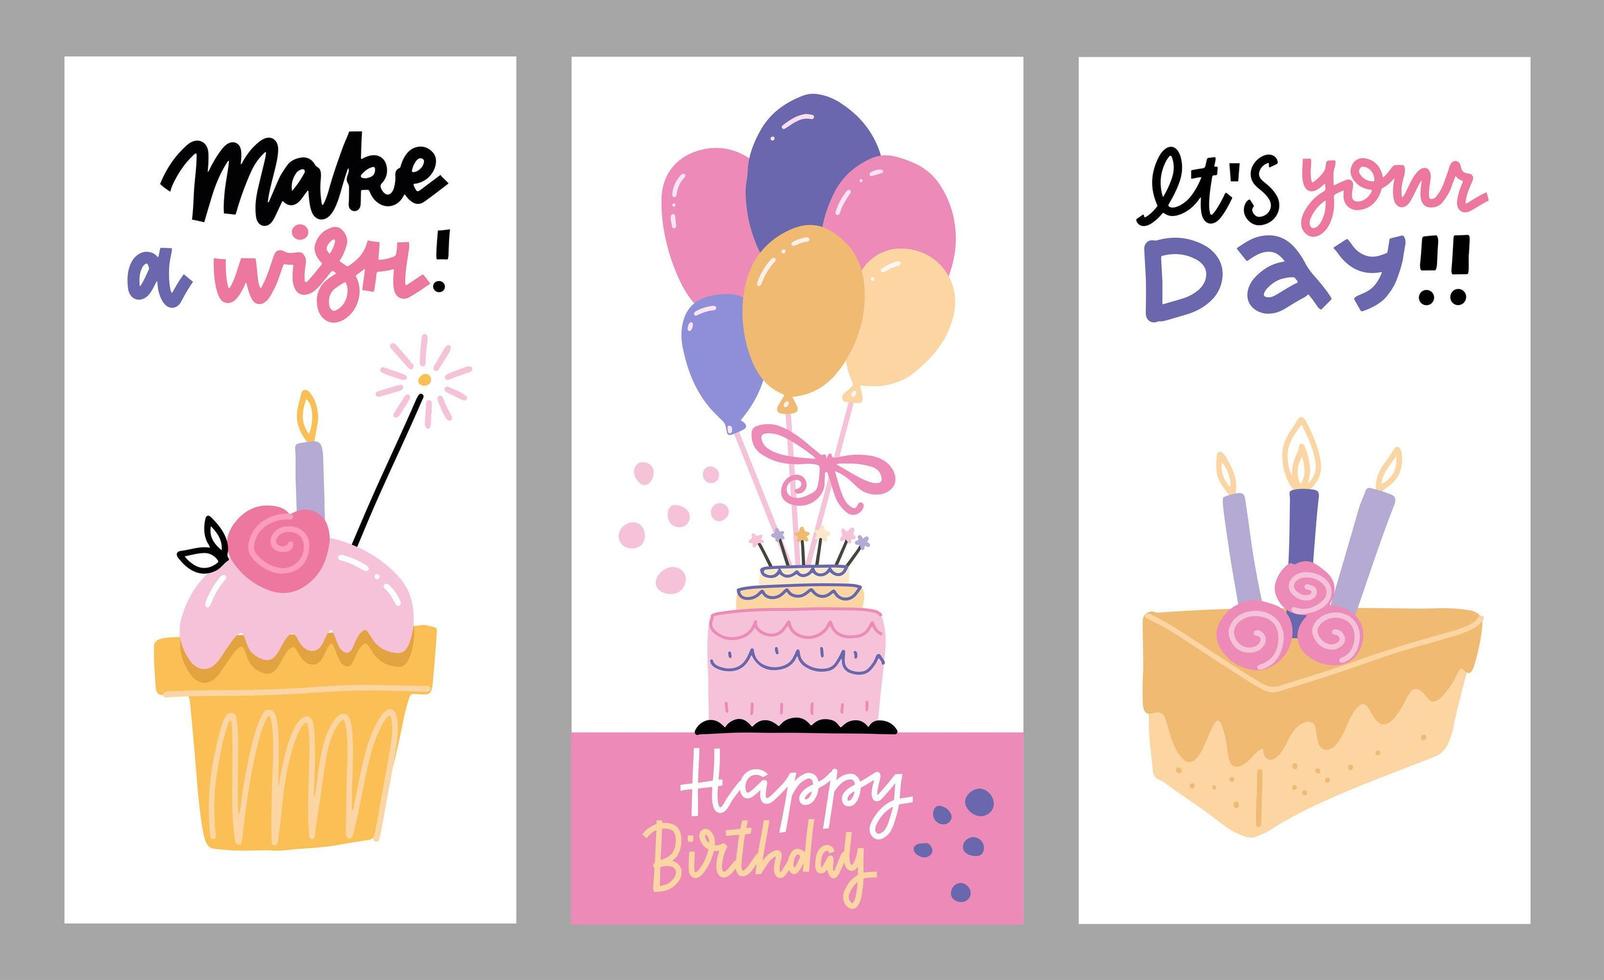 Set of hand drawn flat doodle illustrations for birthday greeting cards, party invitations, birthday website banners, celebration material. Collection of postcards with cakes, candles and lettering vector